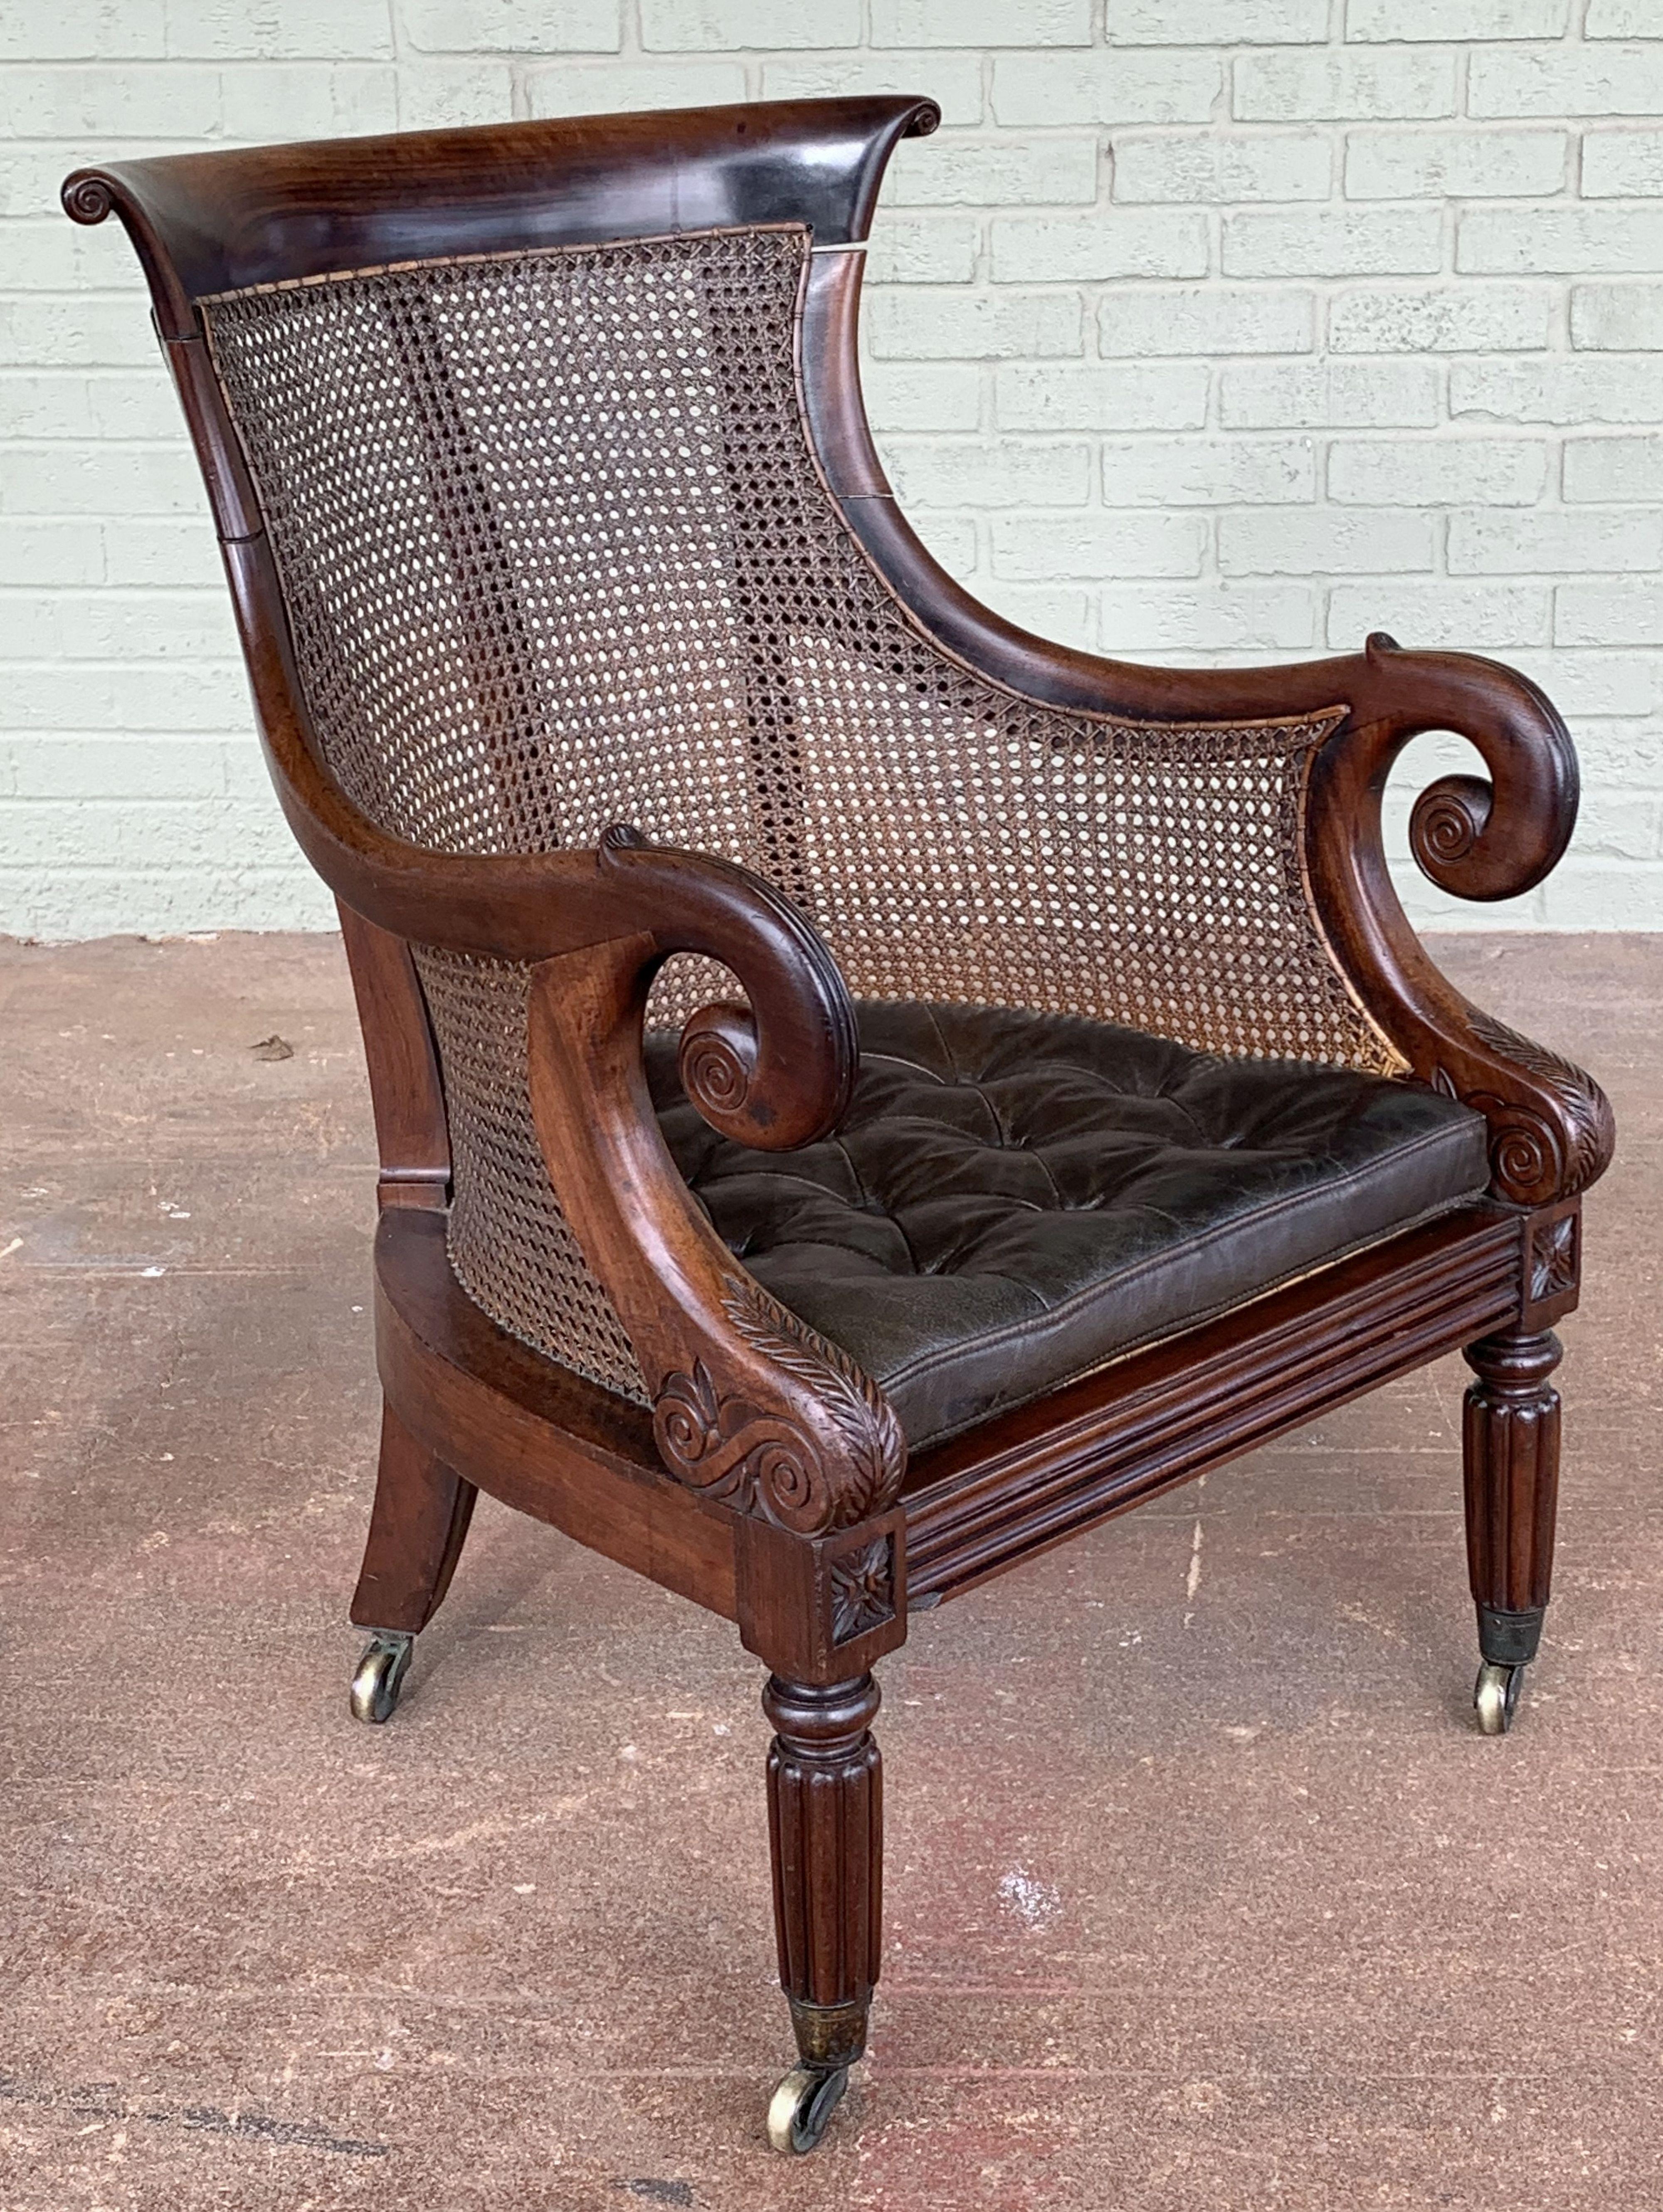 A fine, comfortable English bergère armchair or library chair of caned mahogany from the Regency Period, featuring a Classic, stylish turned scroll back and arms, removable tufted-leather cushion, on turned leg supports, with rolling brass